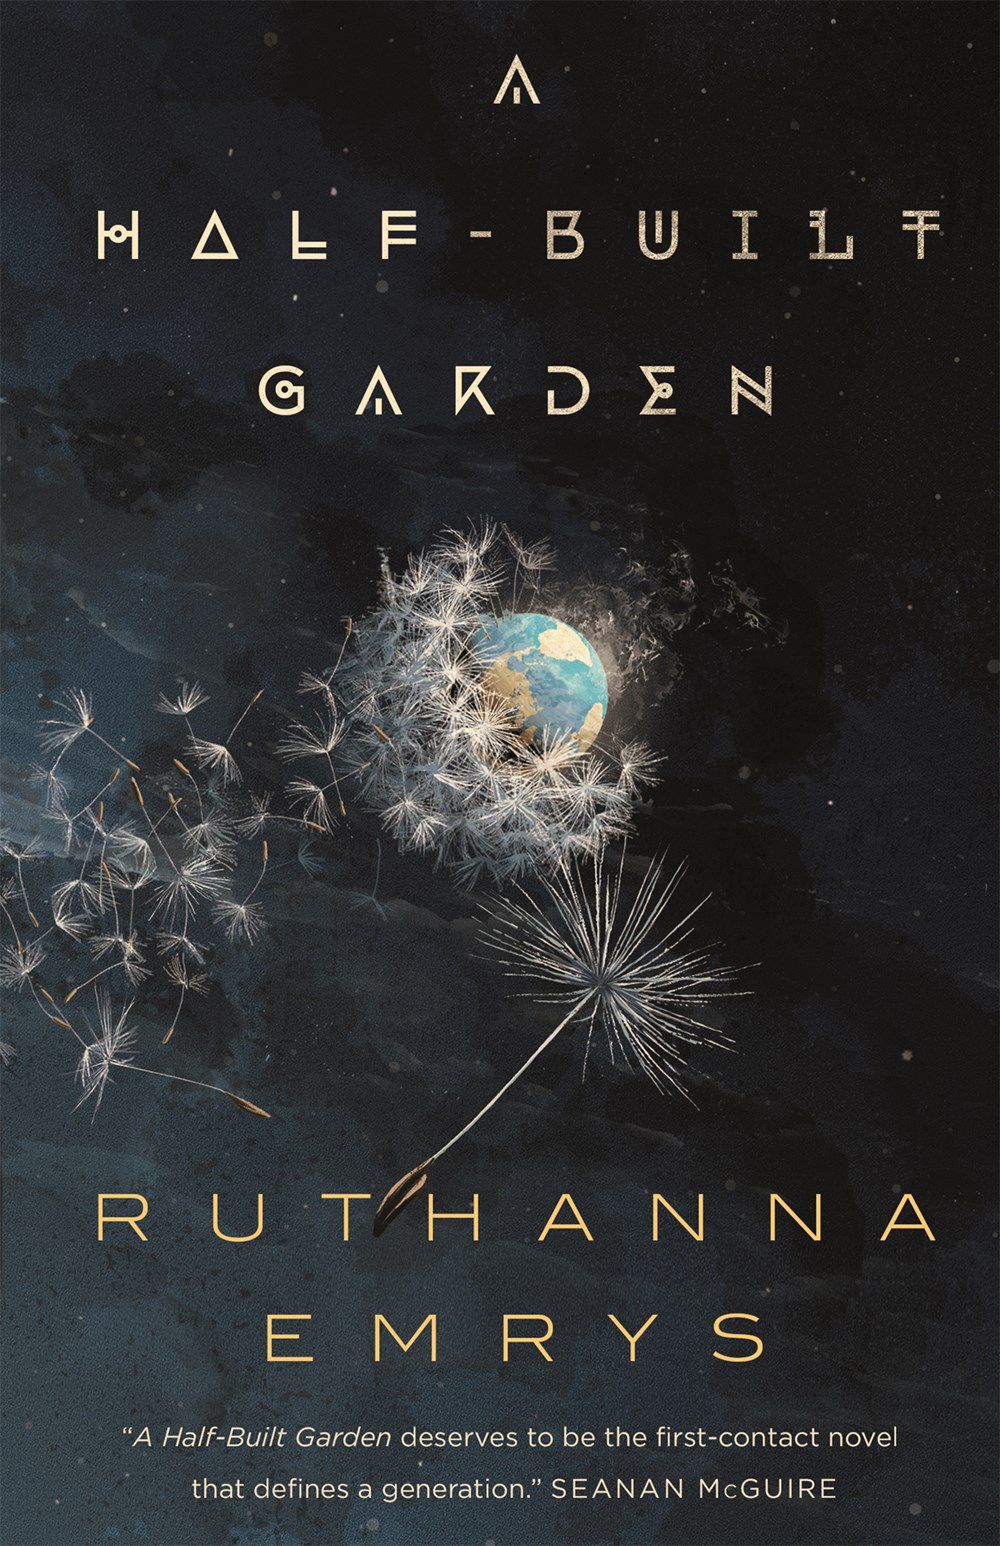 Cover image of a half-built garden, which shows land in the distance surrounded by dandelion seed heads.